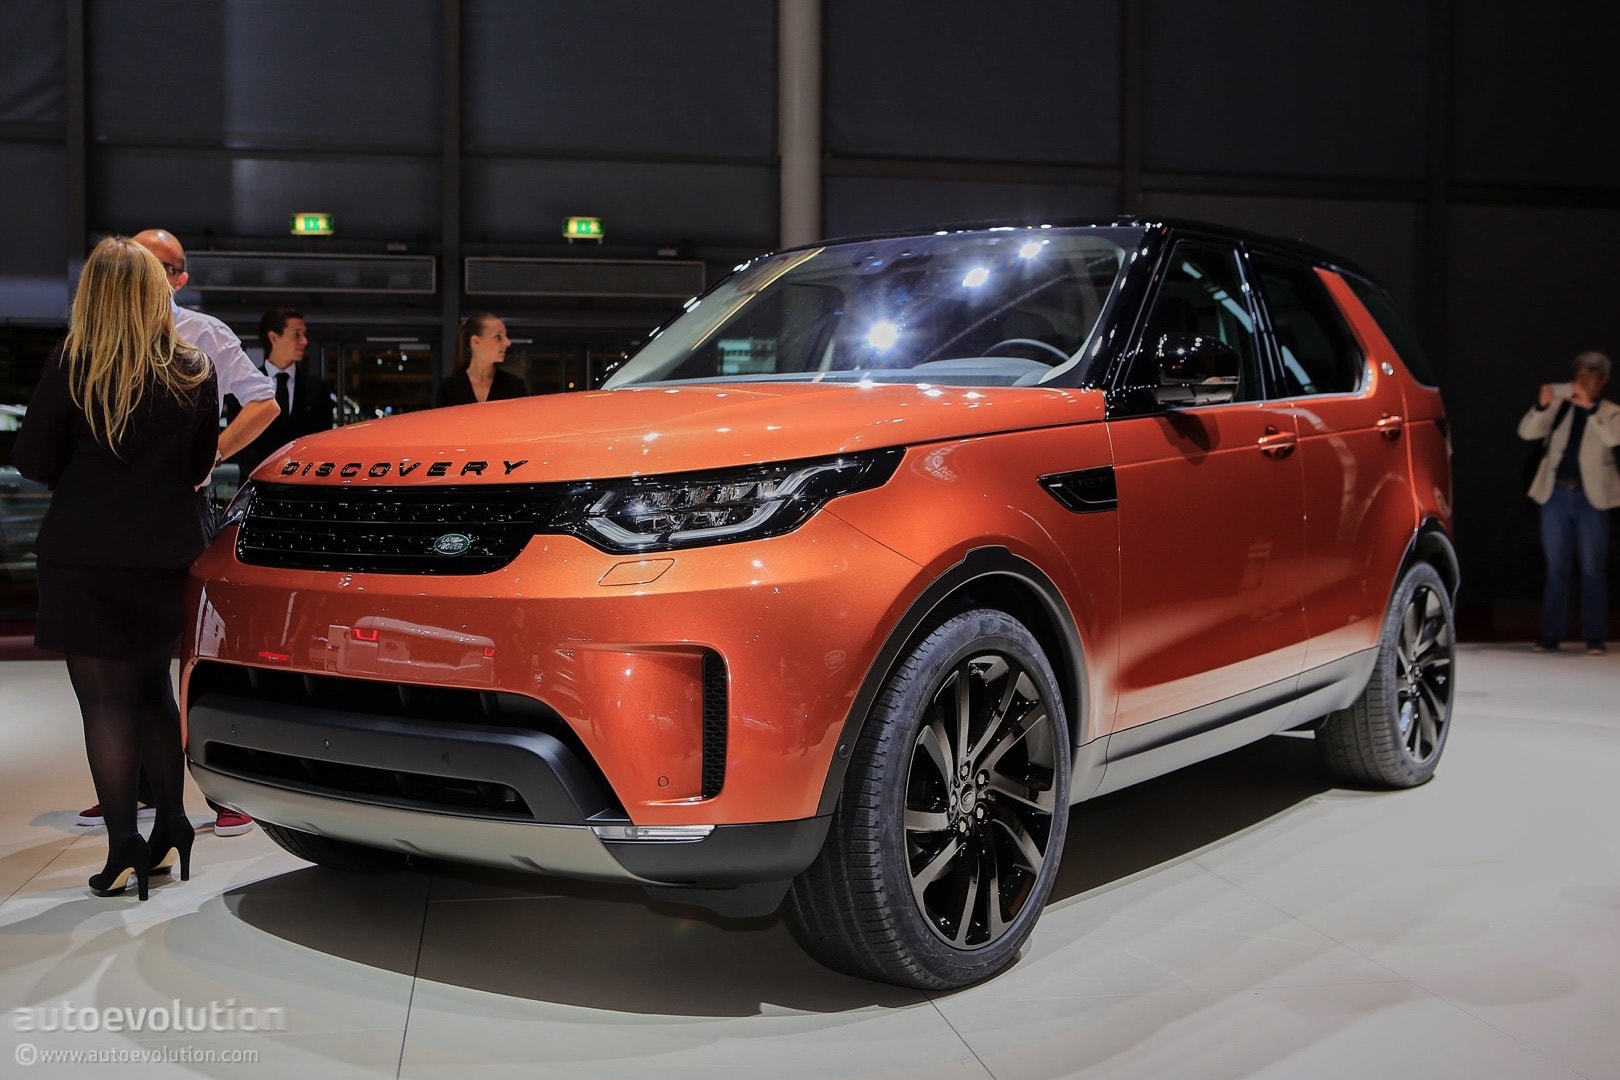 2017 Land Rover Discovery Presented In Paris As the Brand's “Most Versatile  SUV” - autoevolution